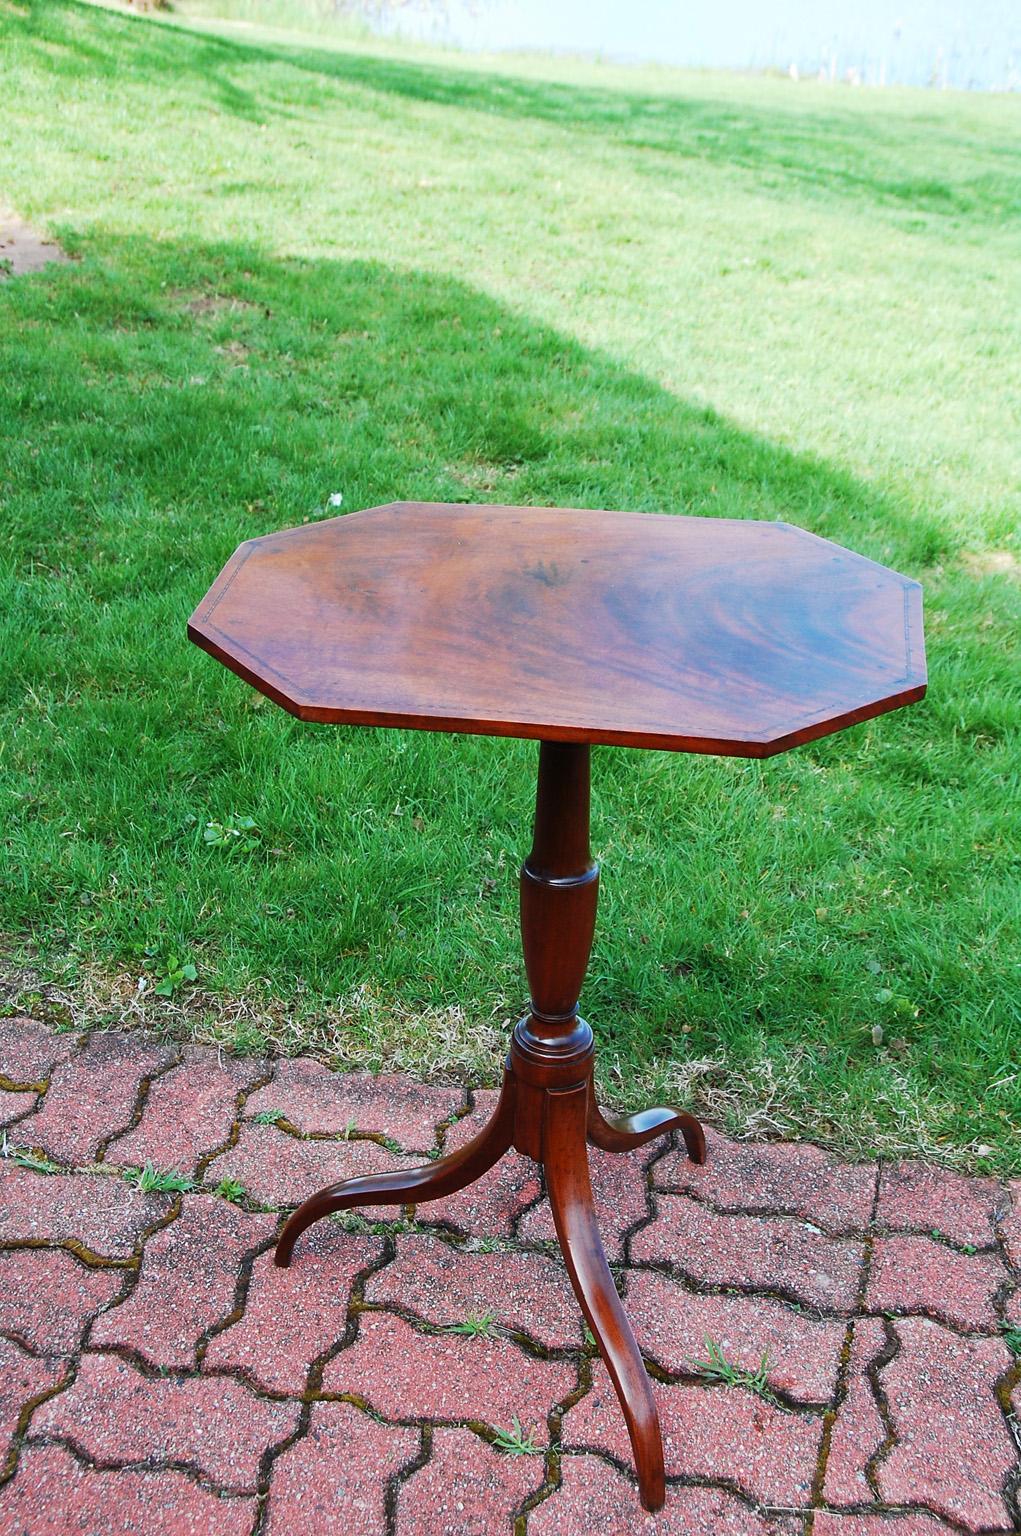 American Federal period Portsmouth, New Hampshire Tripod Candlestand in mahogany with delicate boxwood patterned stringing to the top.. This tilt table has an octagonal top with typical Portsmouth graceful turned urn shaped stem and tripod base. The